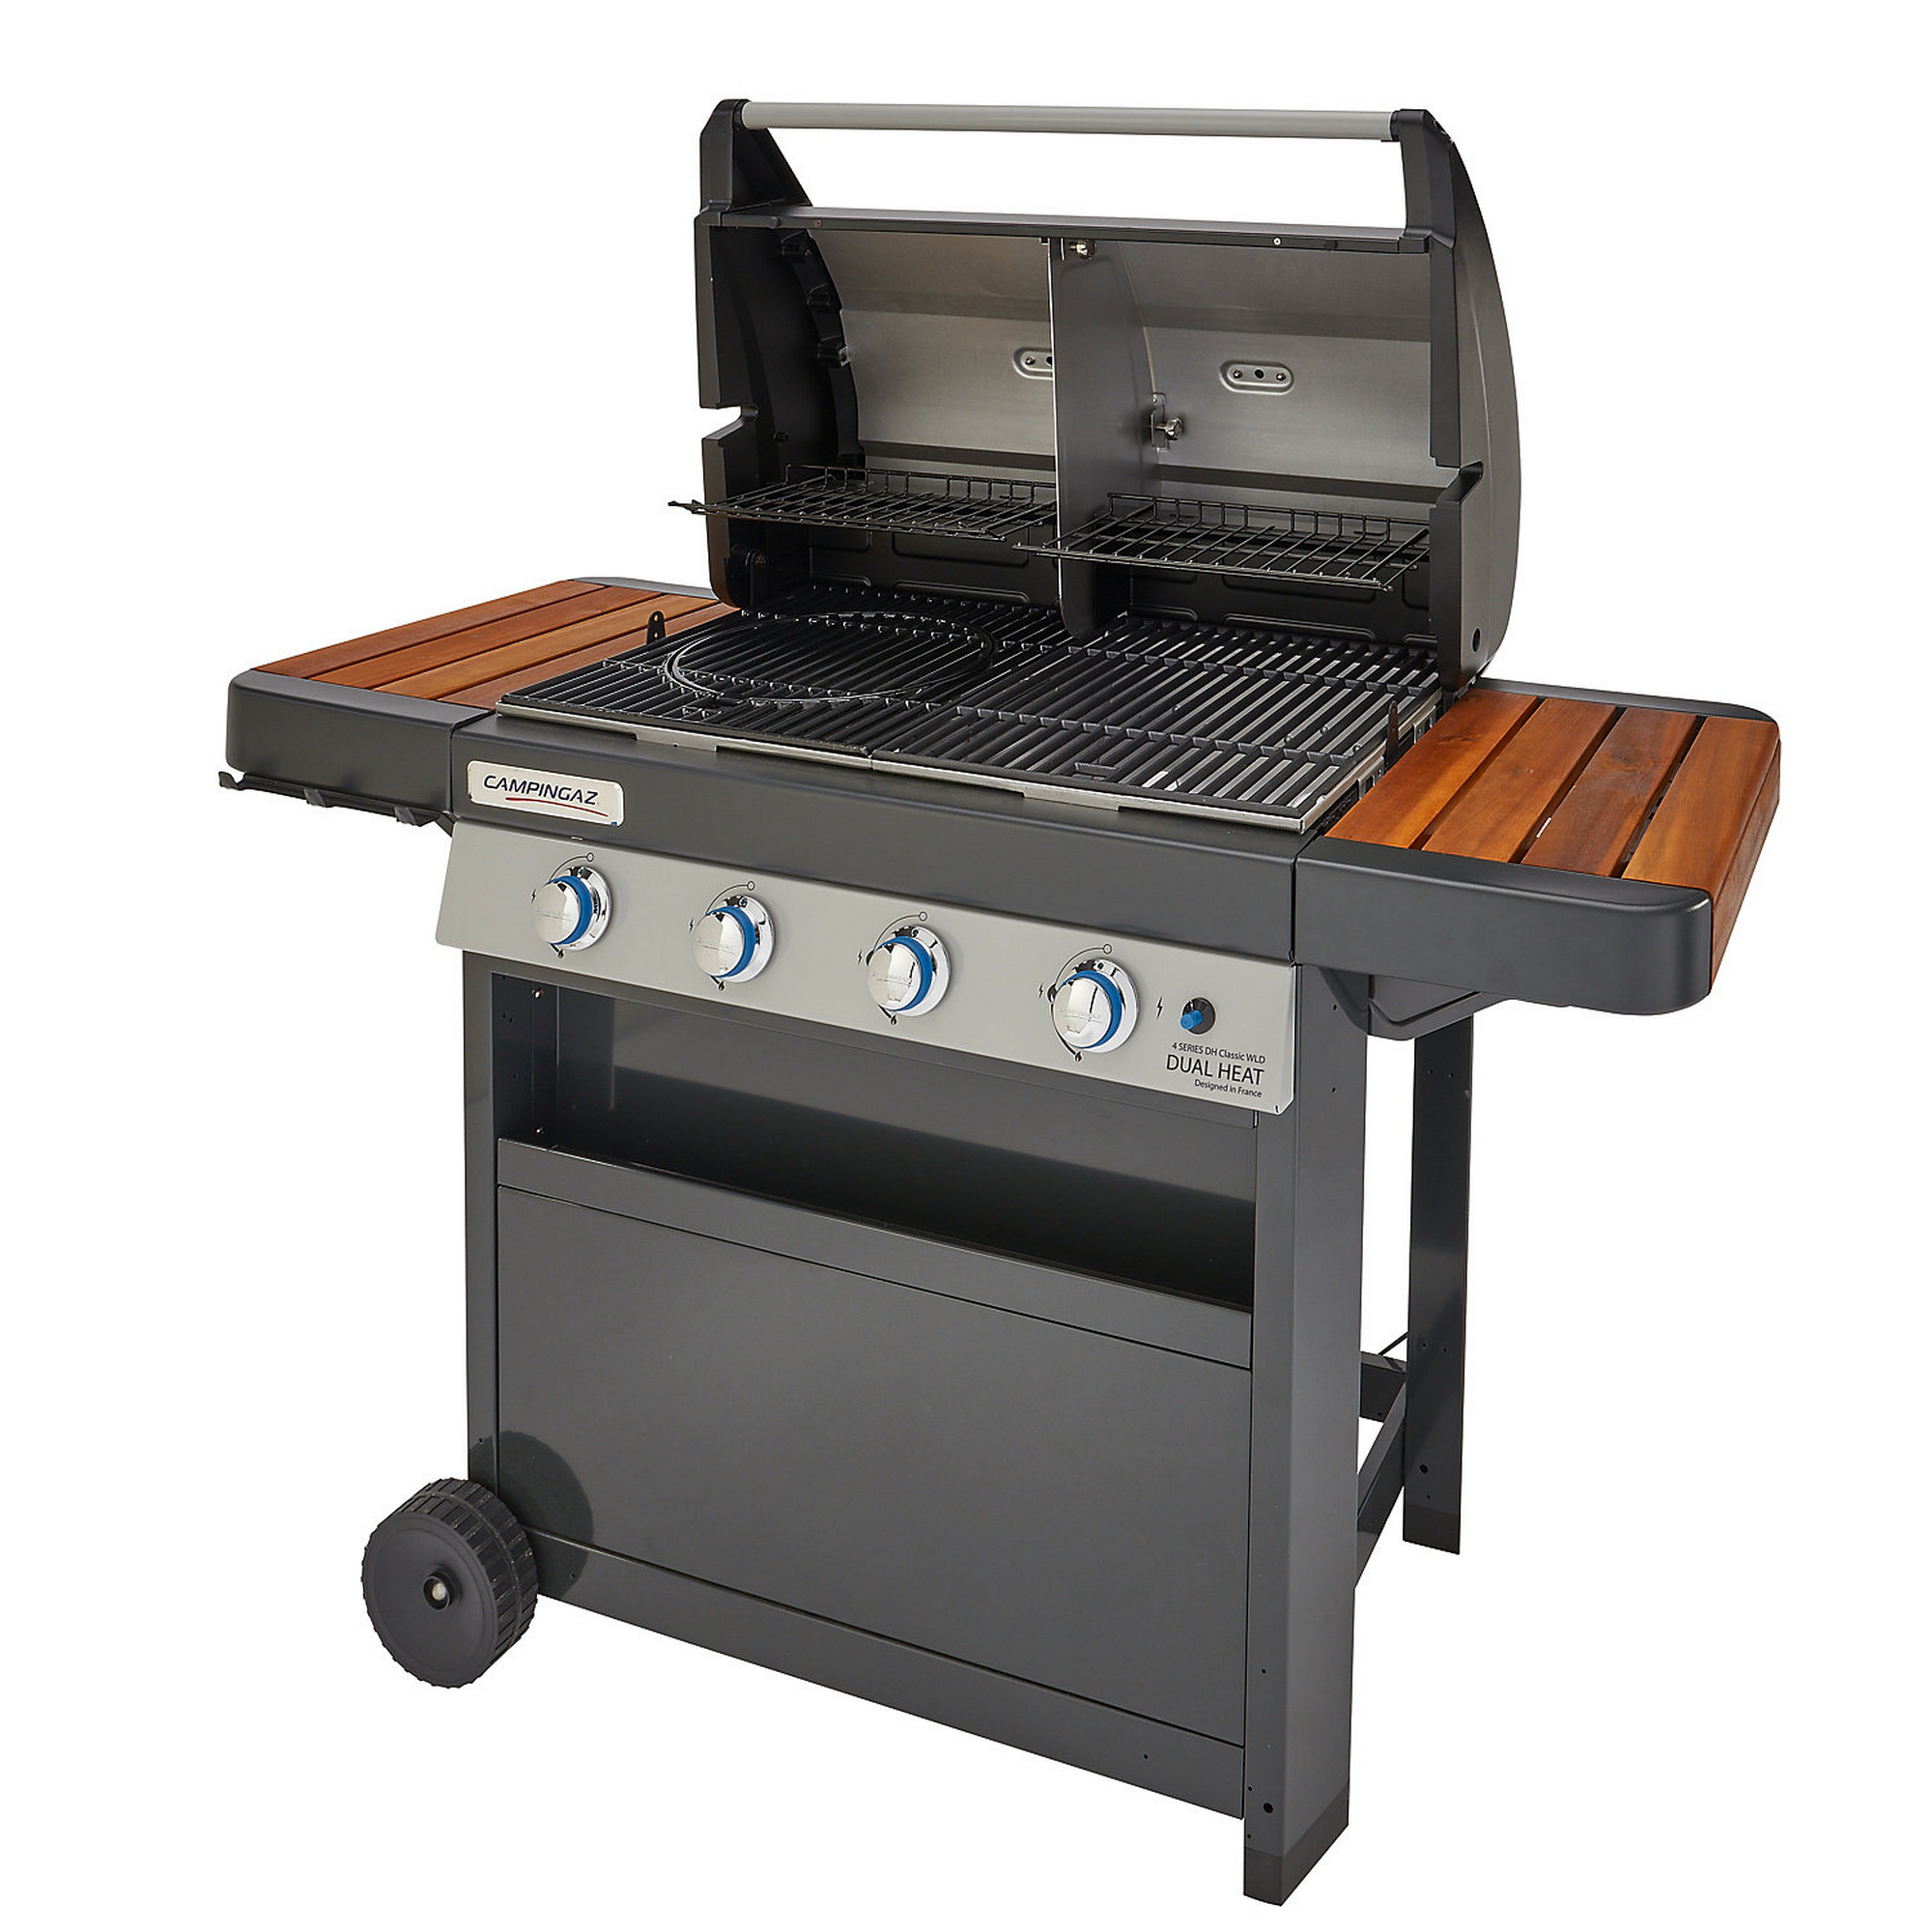 Gasgrill '4 Series Dual Heat Classic WLD' schwarz/holz + product picture